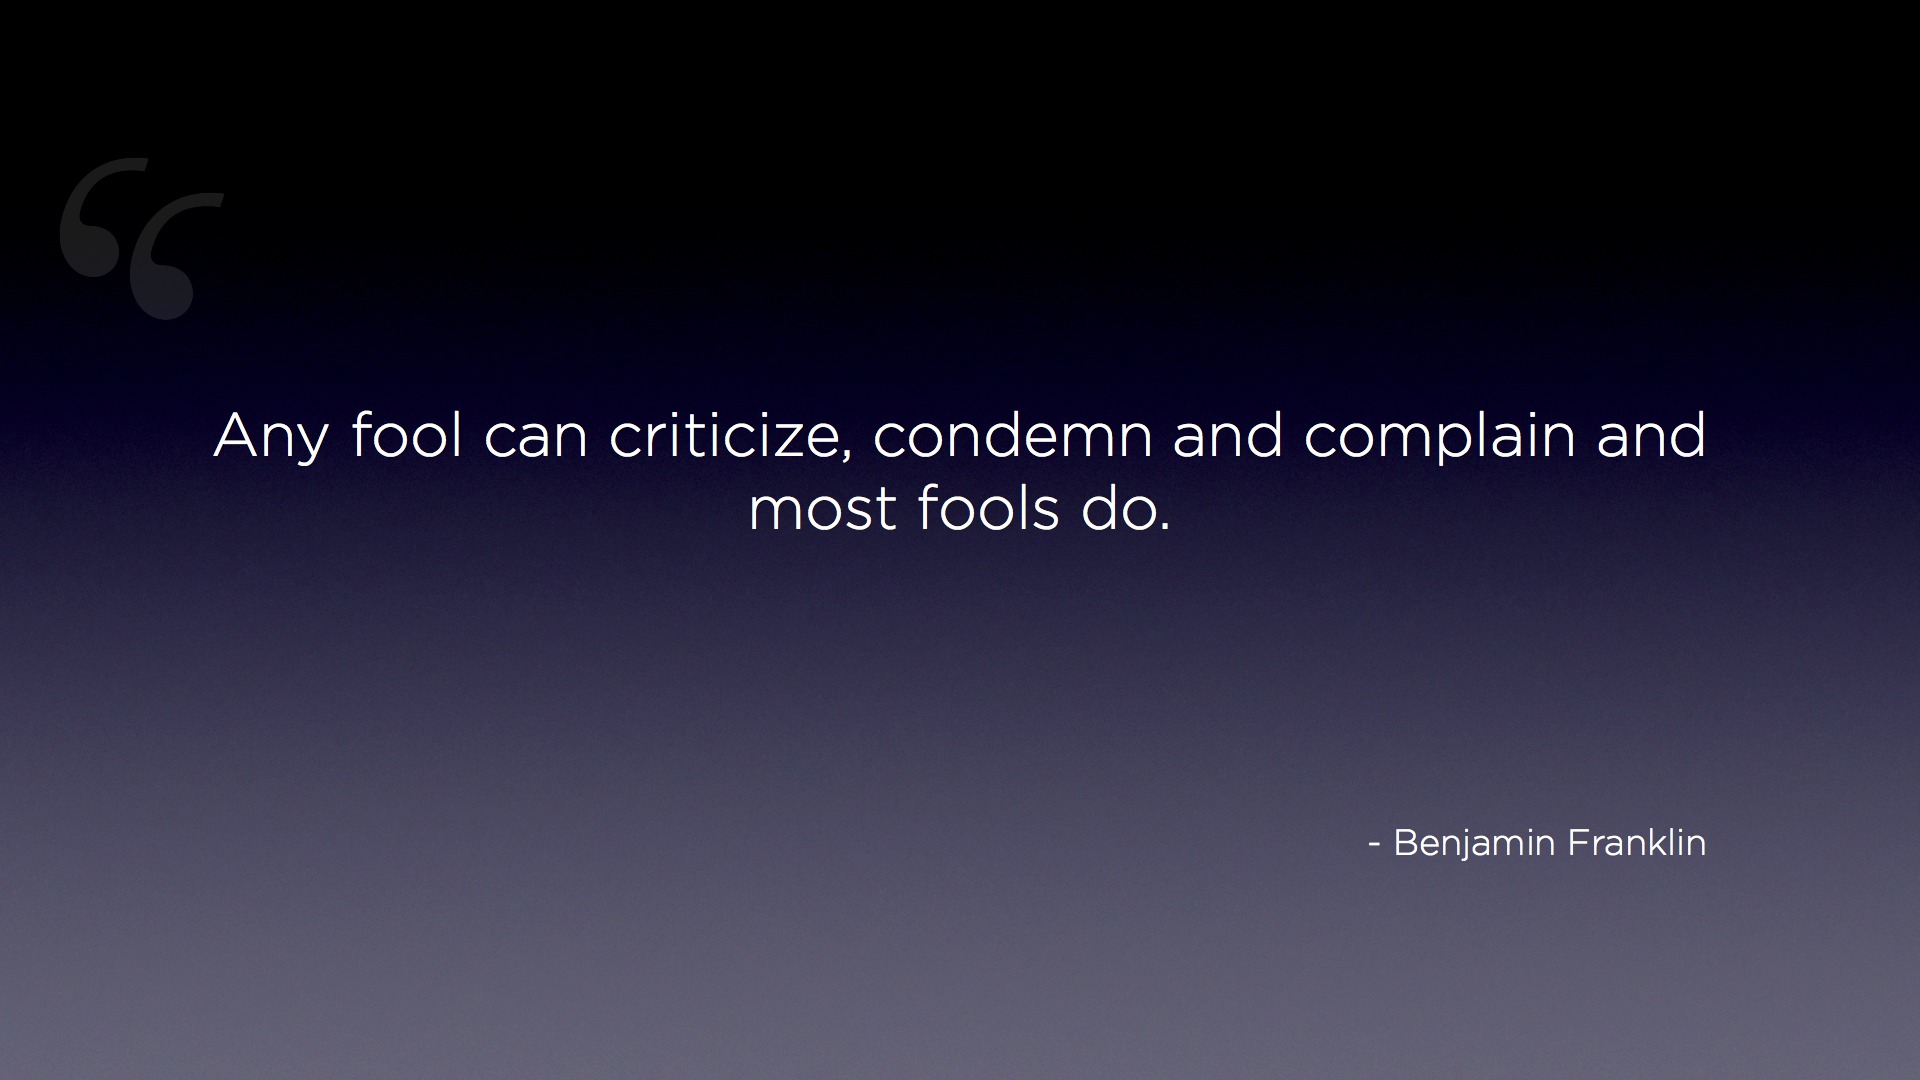 "Any fool can criticize, condemn and complain and most fools do." - Benjamin Franklin